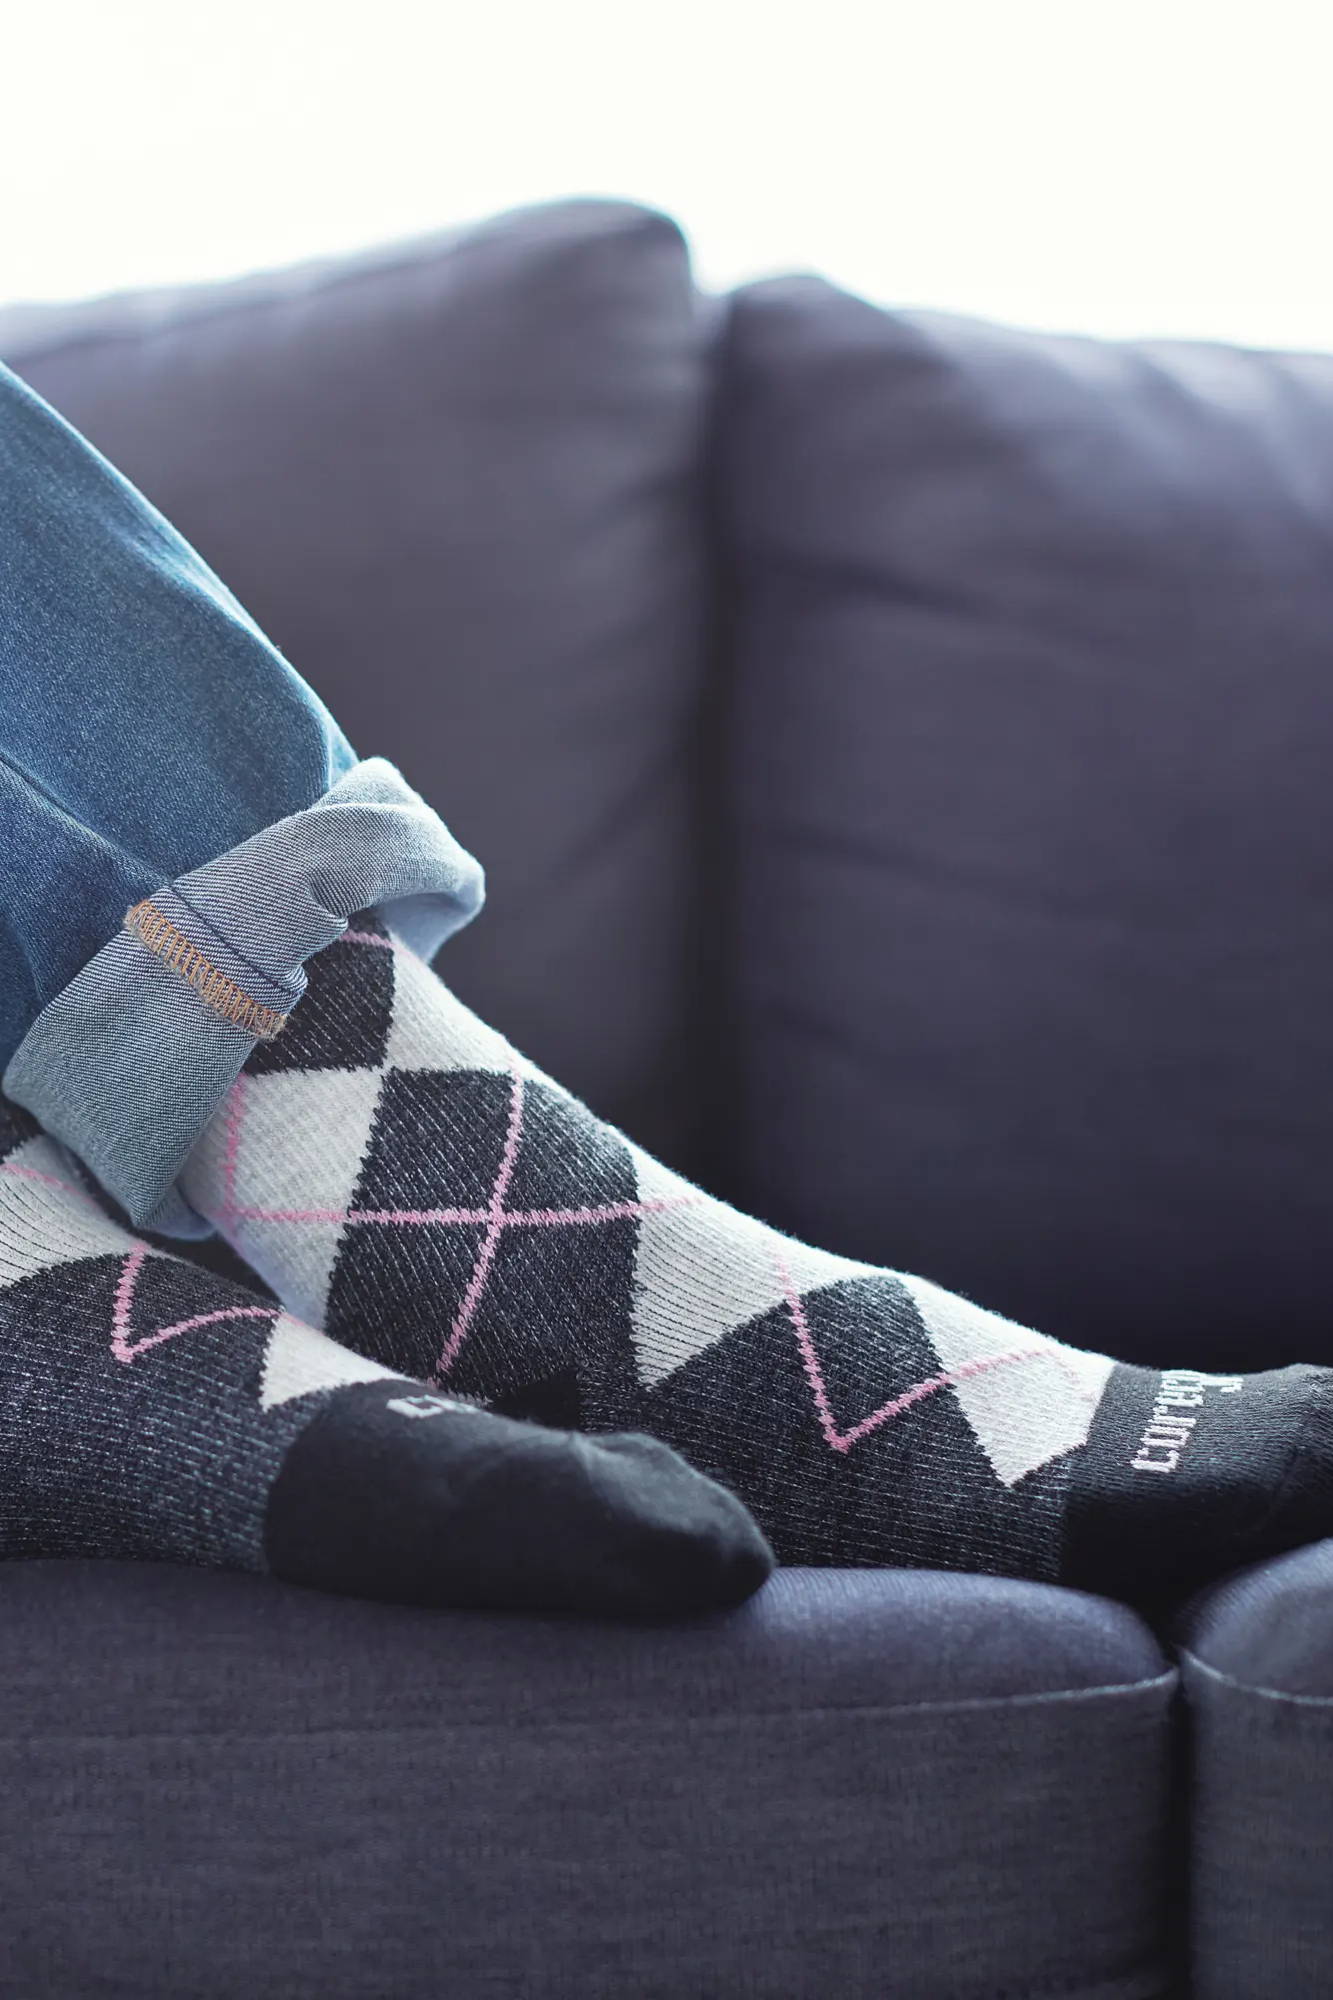 Woman lounging on couch wearing Core-Spun Gradient Compression Socks in Pink Argyle